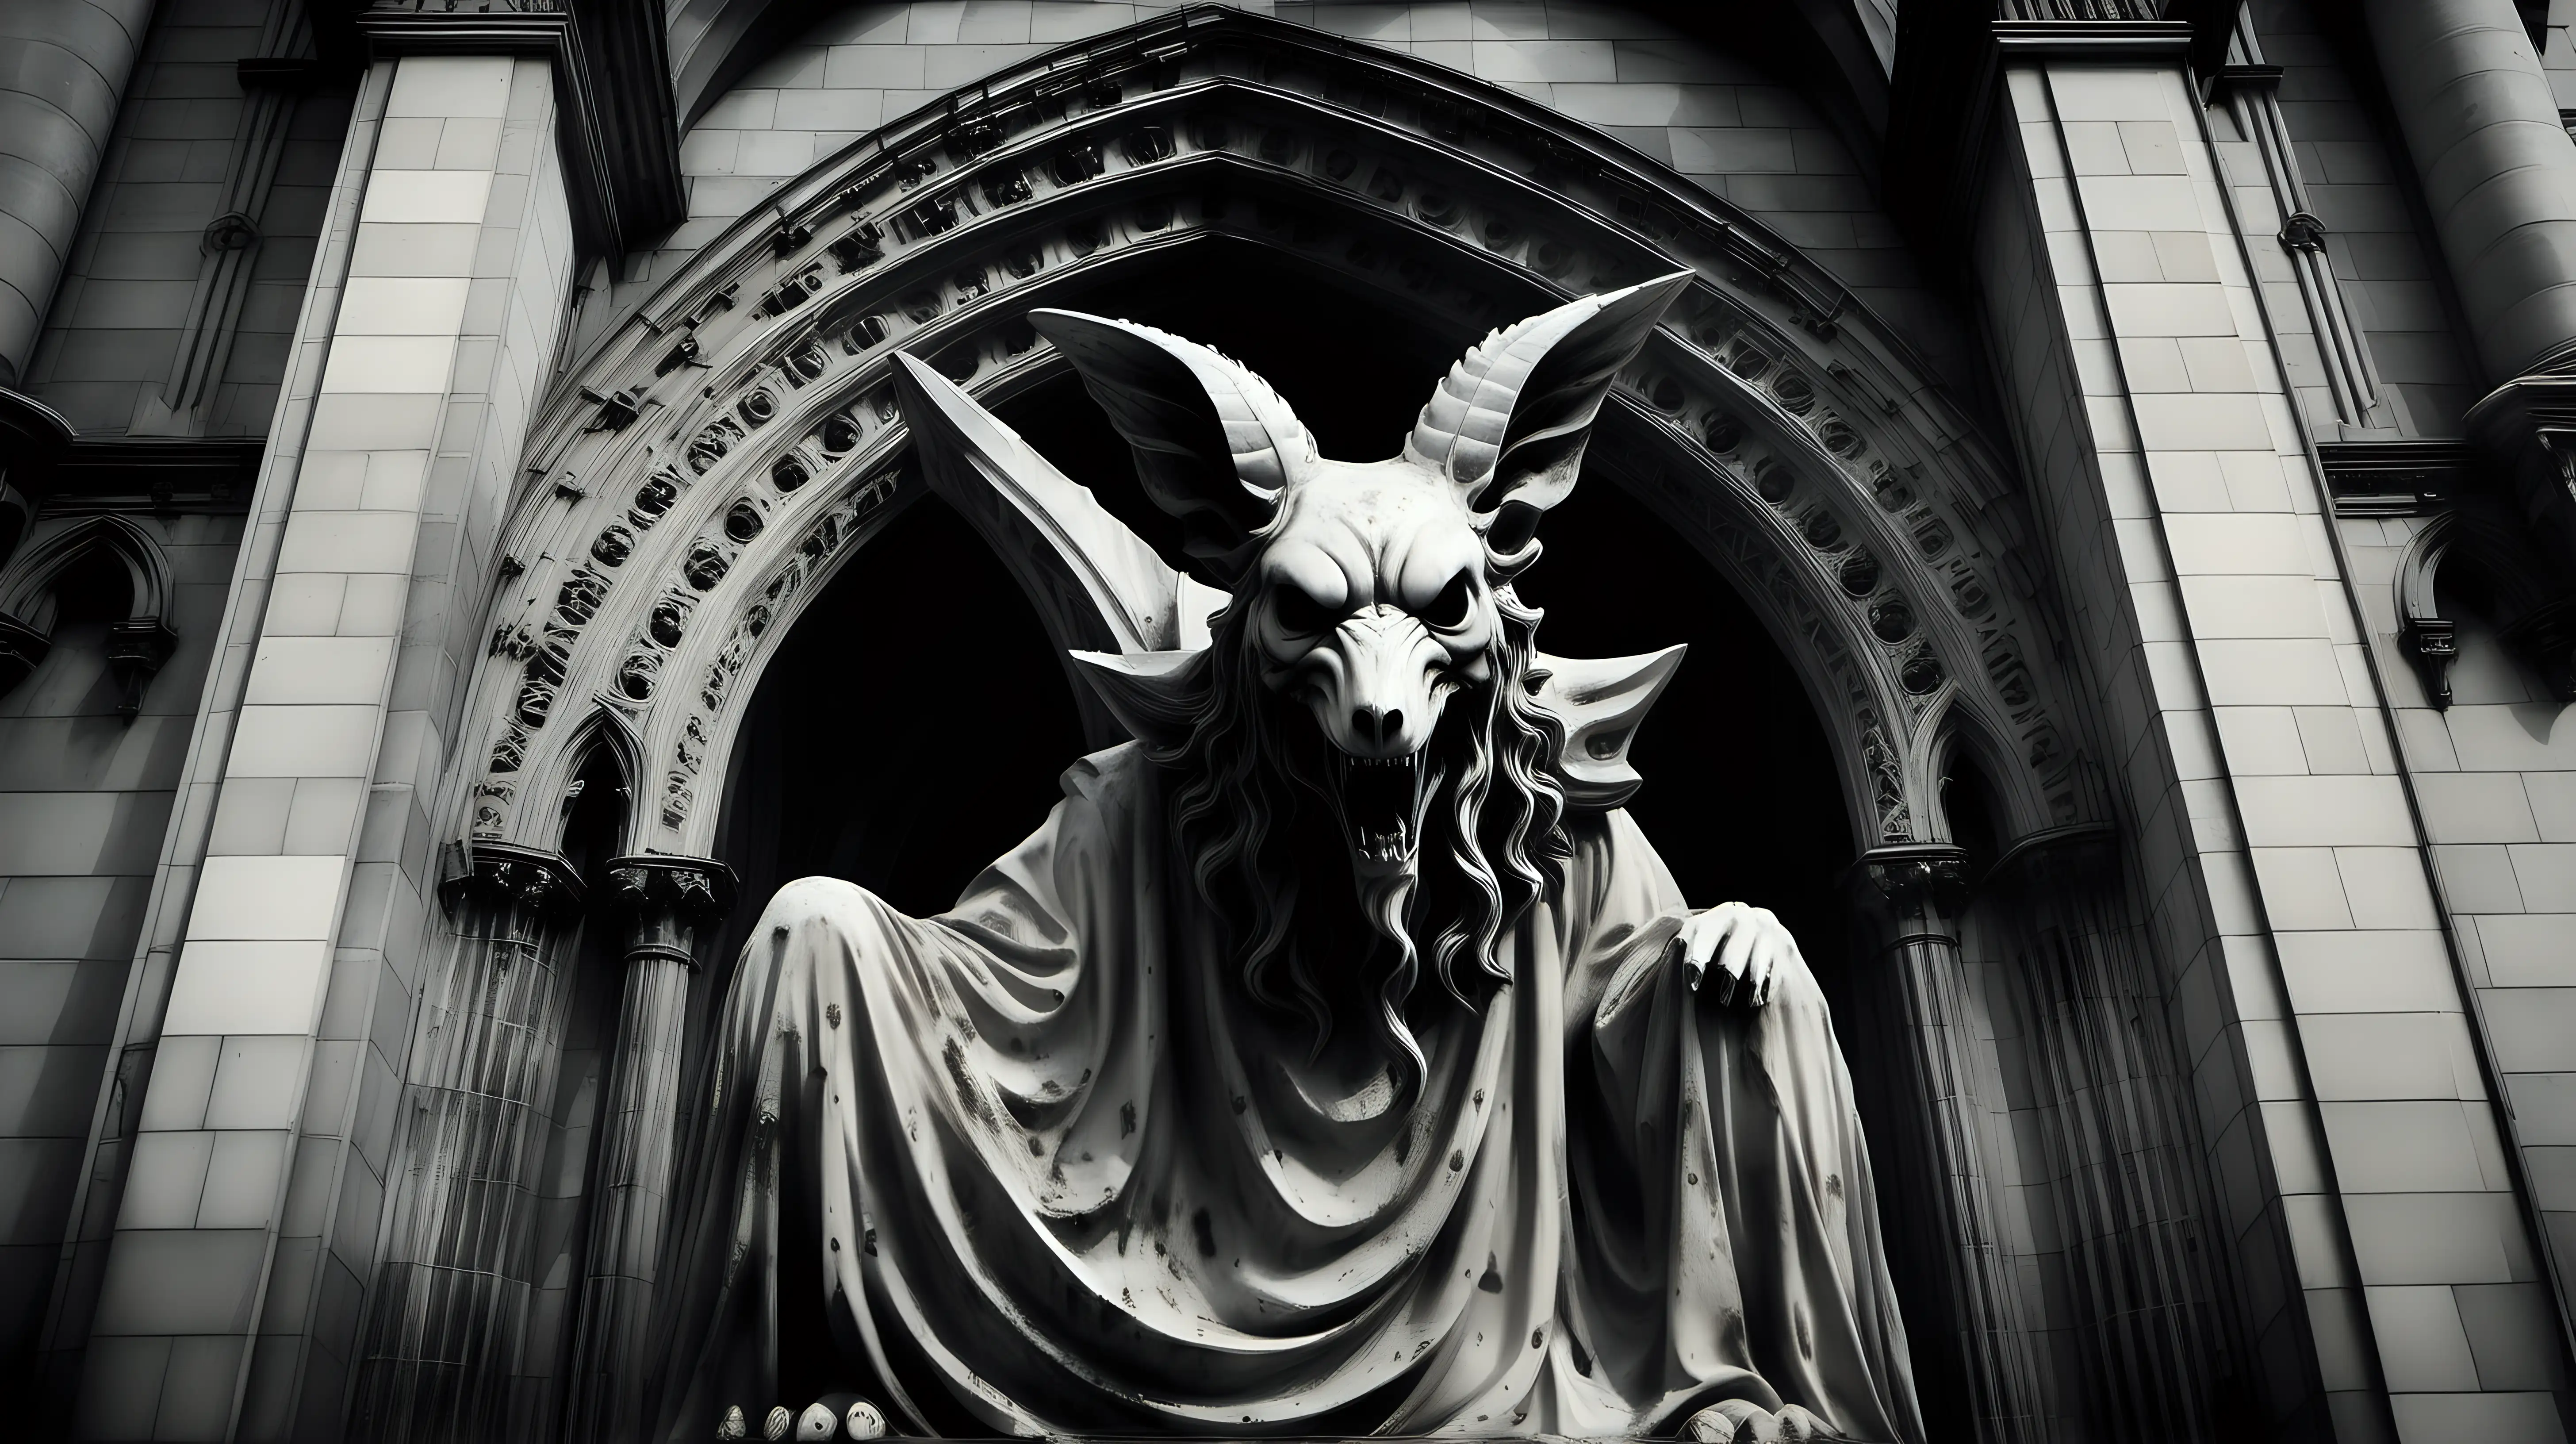 Gothic Animal Statue Terror at Grunge Cathedral Facade